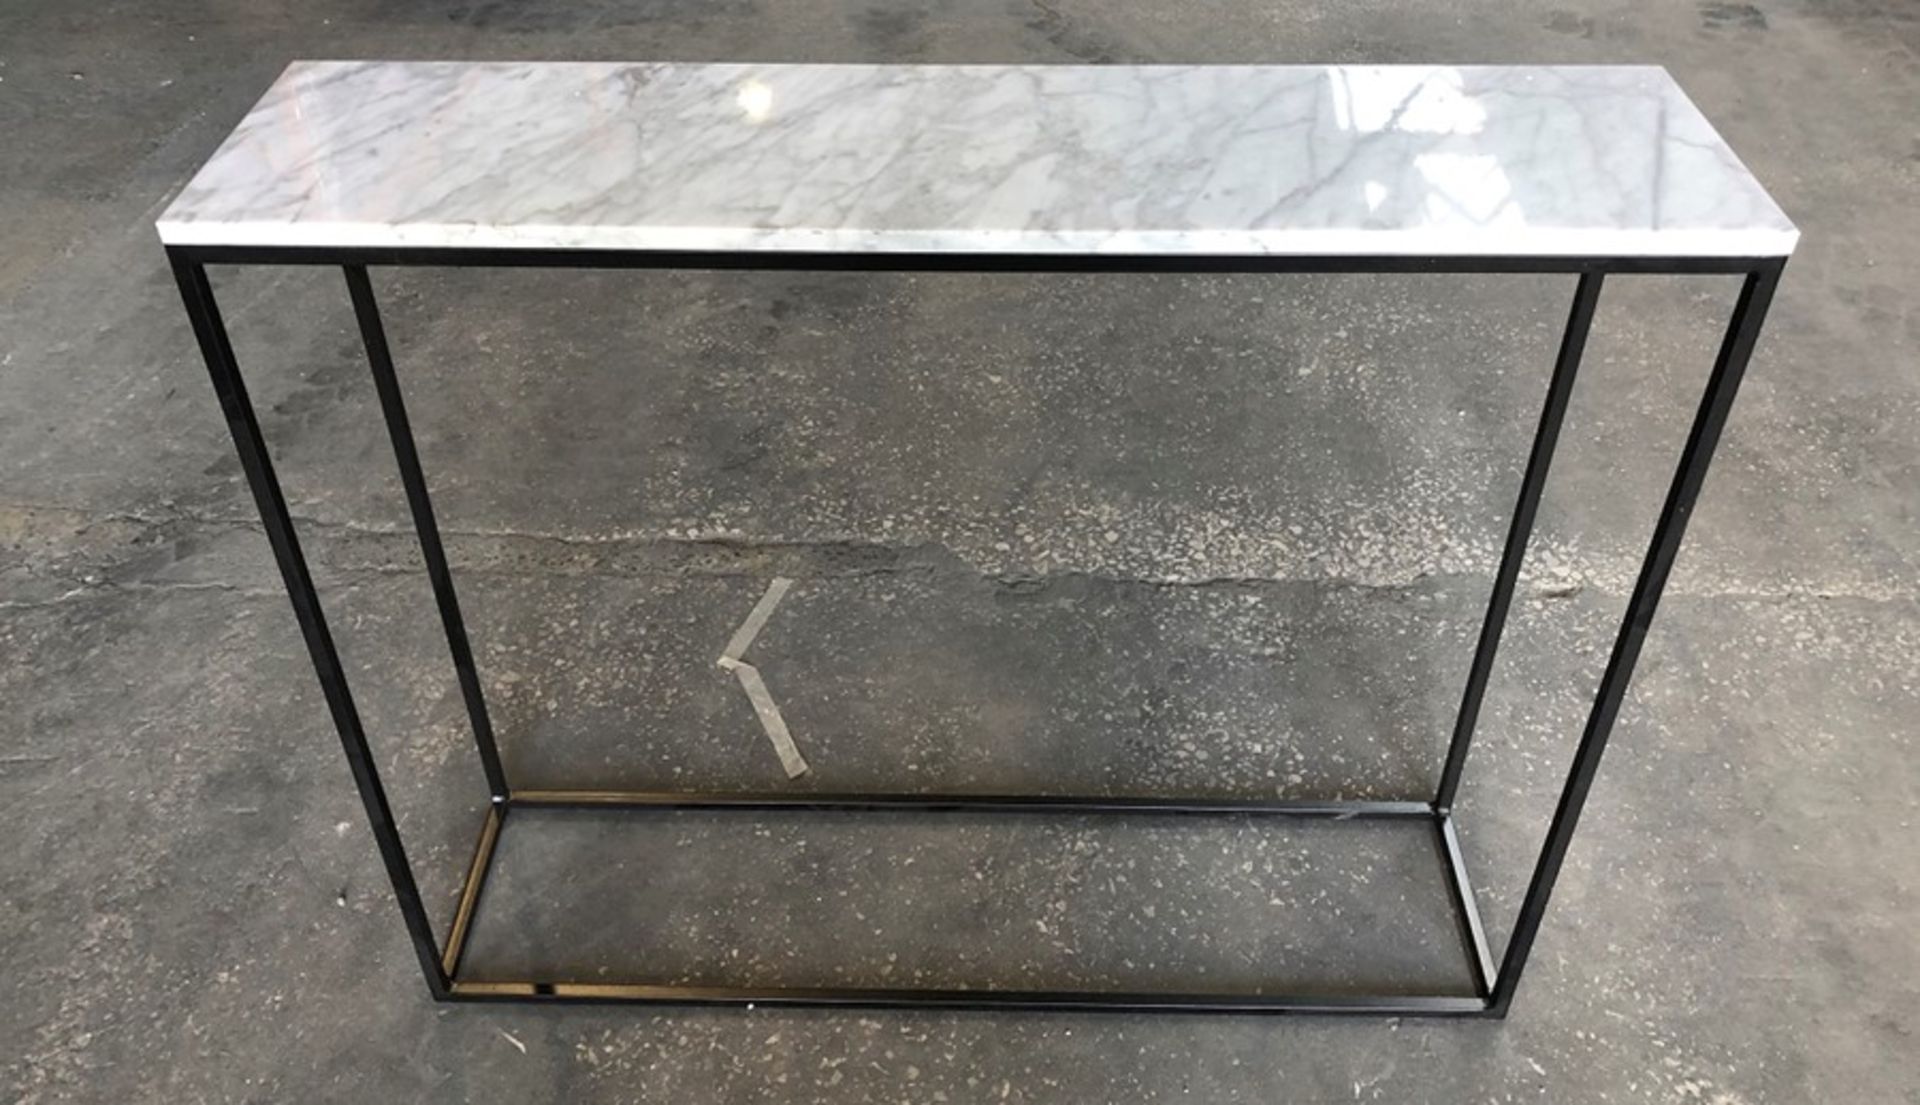 1 LA REDOUTE MAHAUT MARBLE AND STEEL CONSOLE TABLE - WHITE MARBLE (SOLD AS SEEN)